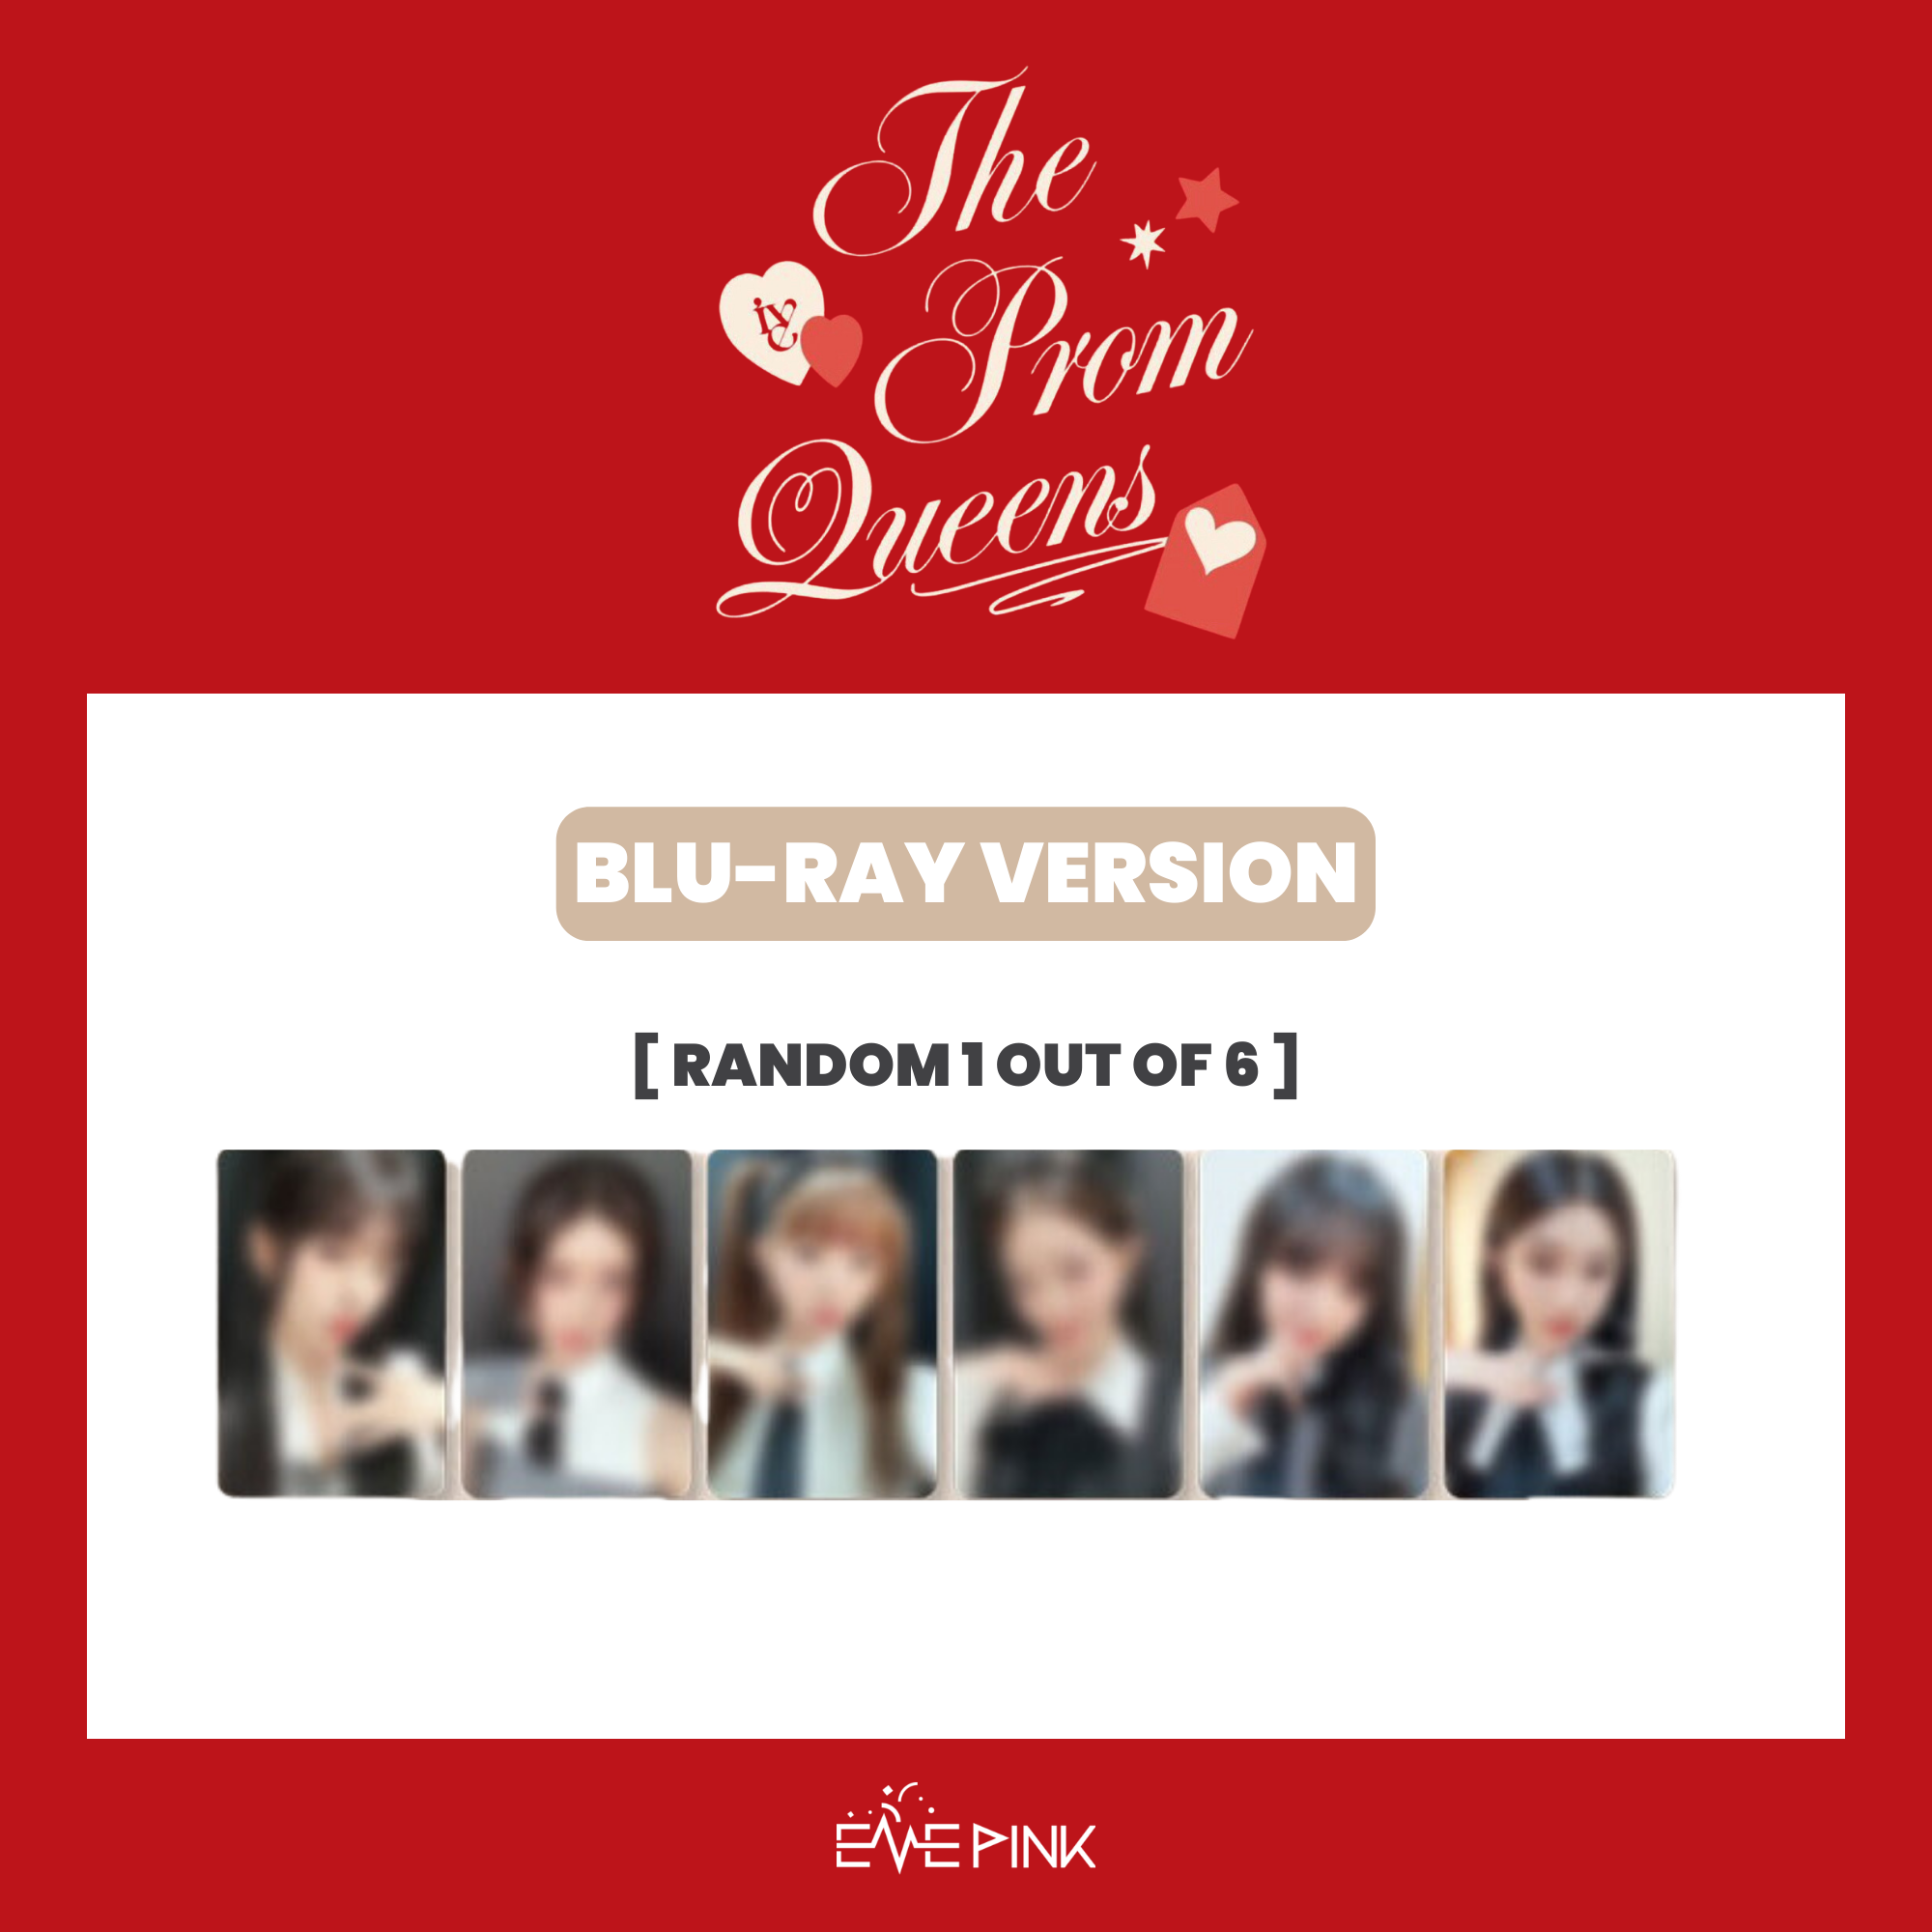 IVE (아이브) - THE FIRST FAN CONCERT [The Prom Queens] (Blu-ray 